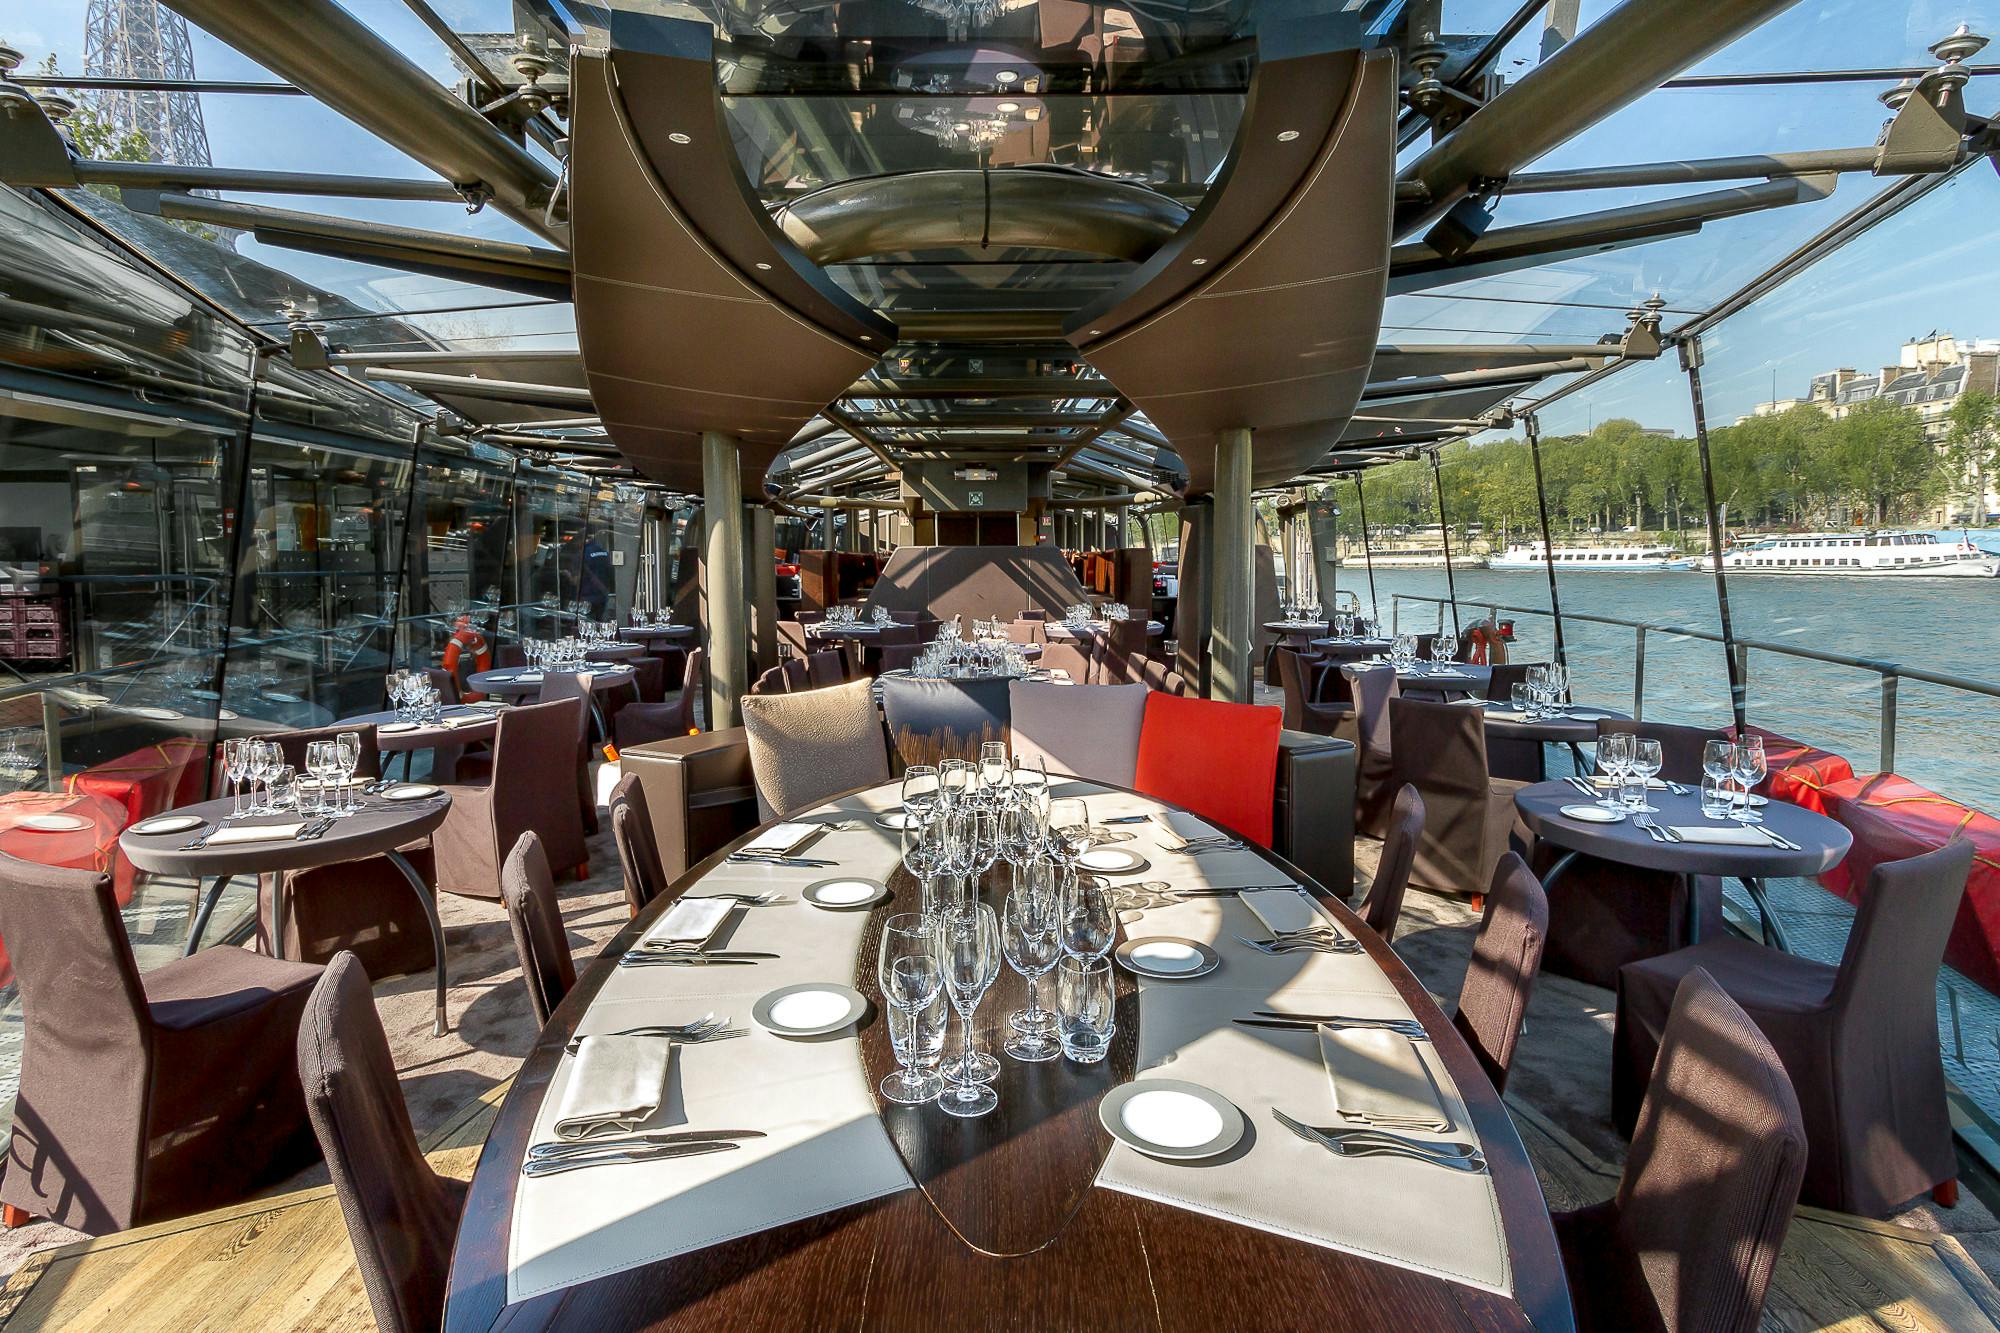 Tour 35 Champagne Lunch Cruise boat interior.jpg